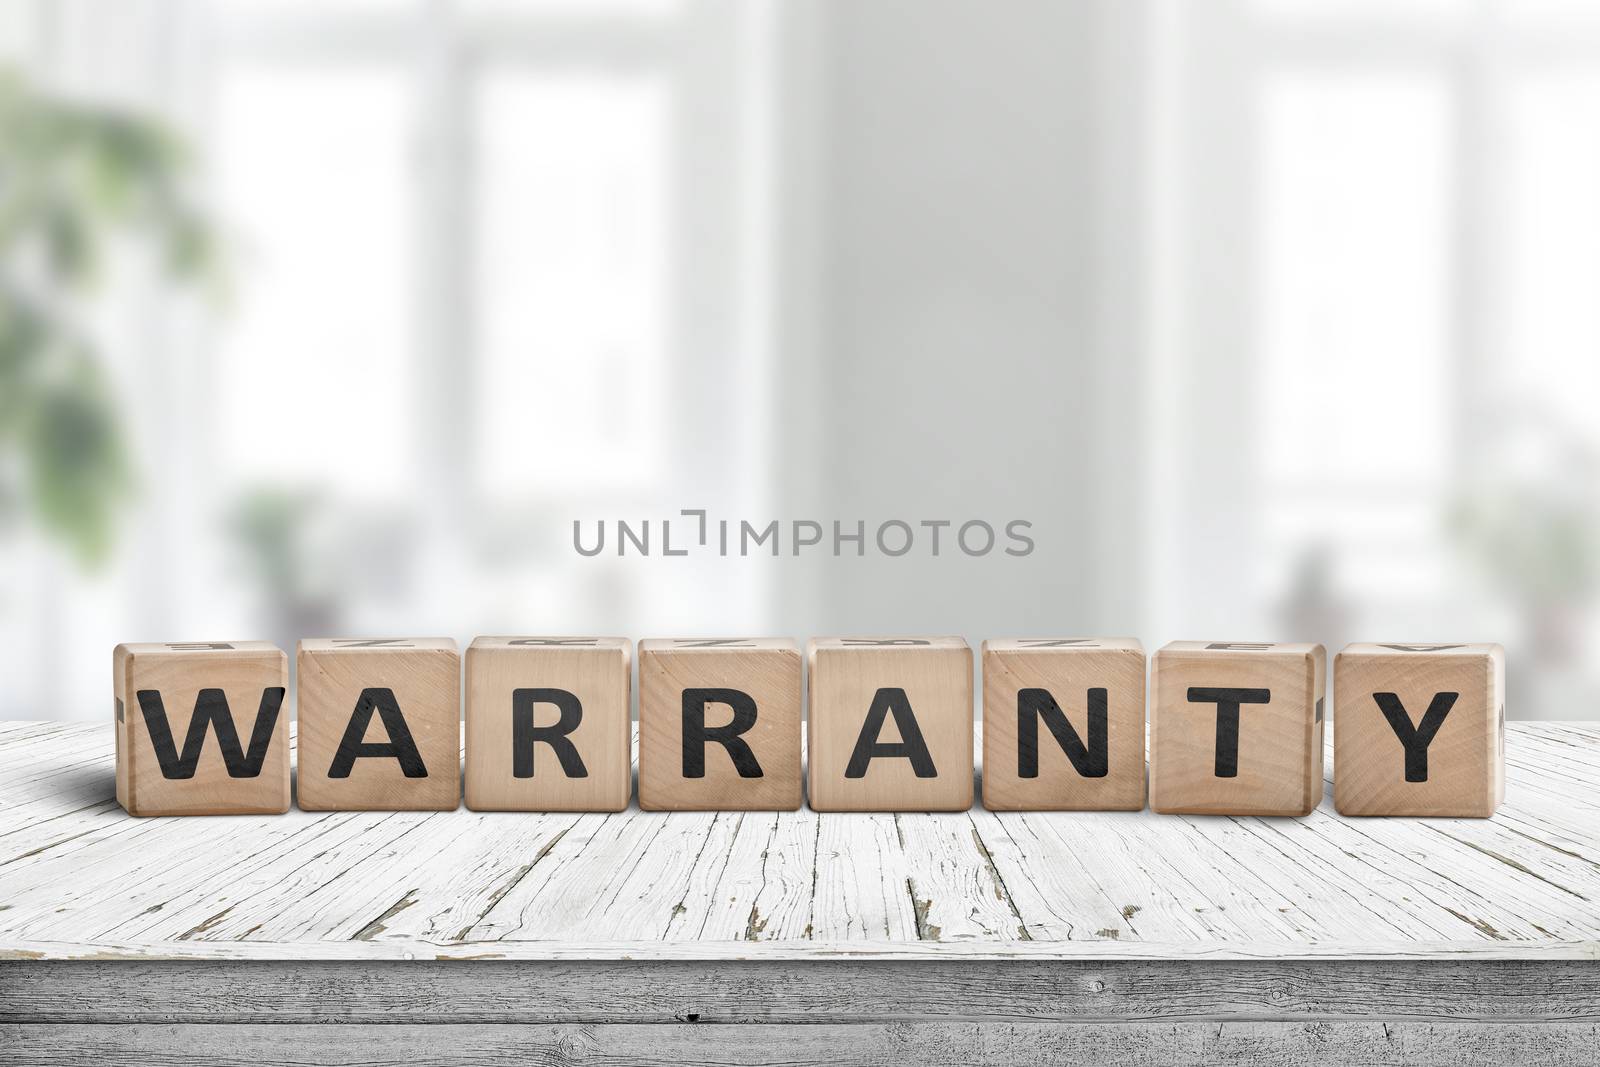 Warranty sign on a wooden desk in a bright environment with green plants